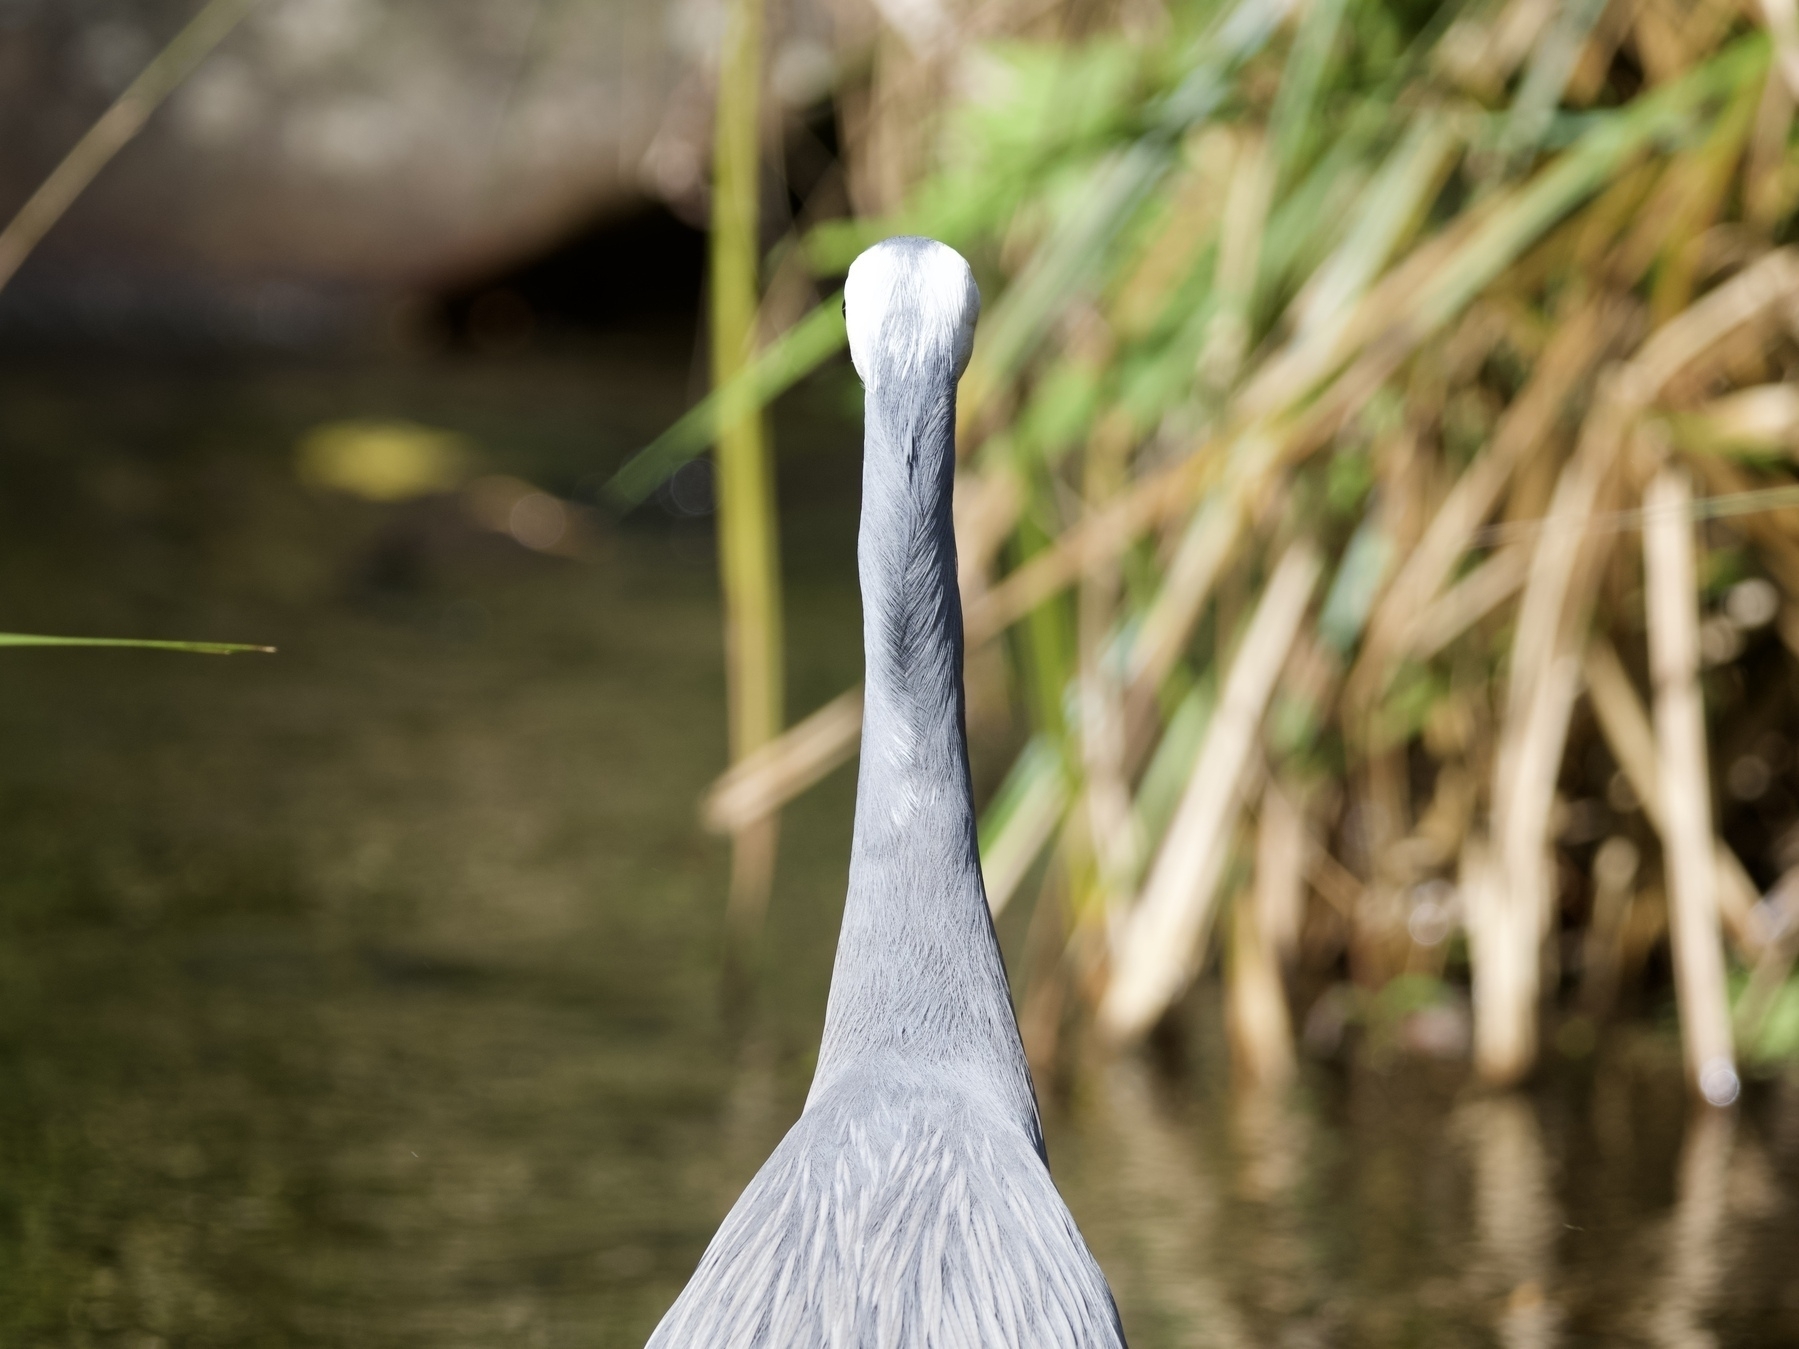 Staring right at the back of an egret’s head and neck, with a blurred pond in the background.